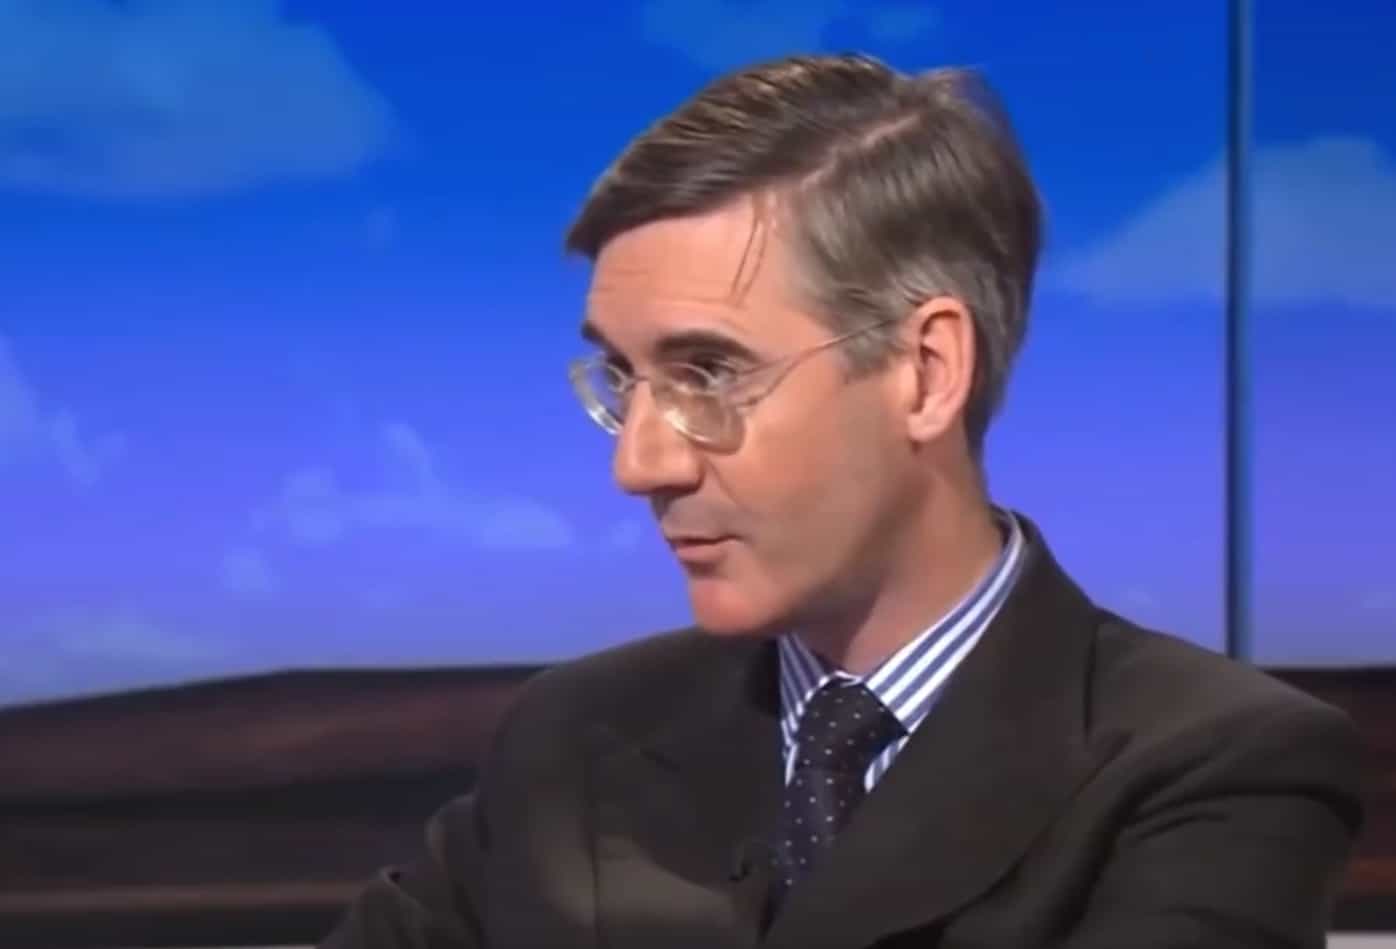 Rees-Mogg says ‘haters of Brexit’ are trying to bring Johnson down ahead of inquiry